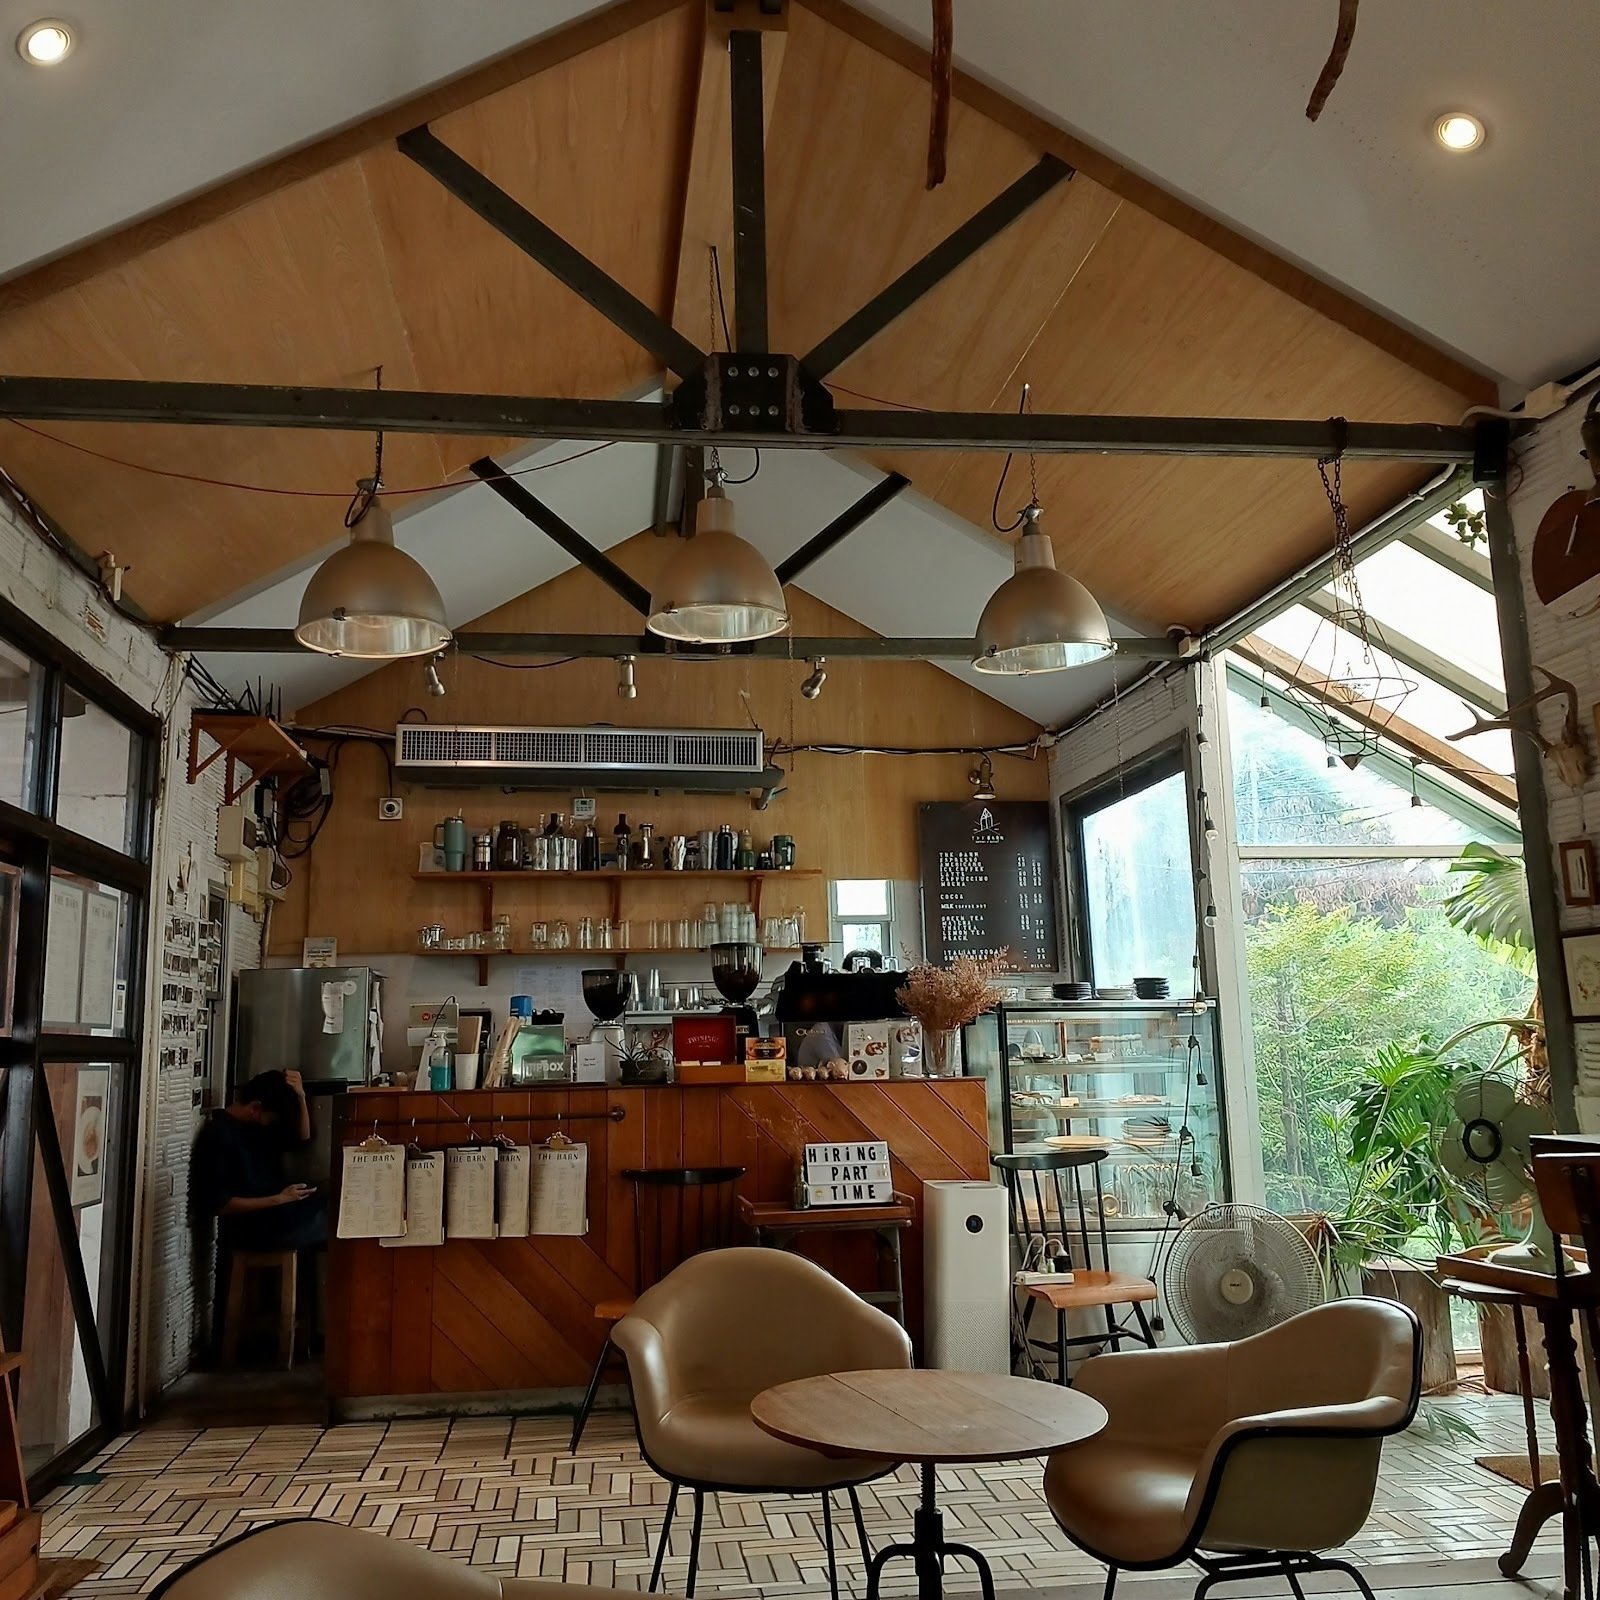 <span class="translation_missing" title="translation missing: en.meta.location_title, location_name: The Barn Eatery And Design, city: Chiang Mai">Location Title</span>